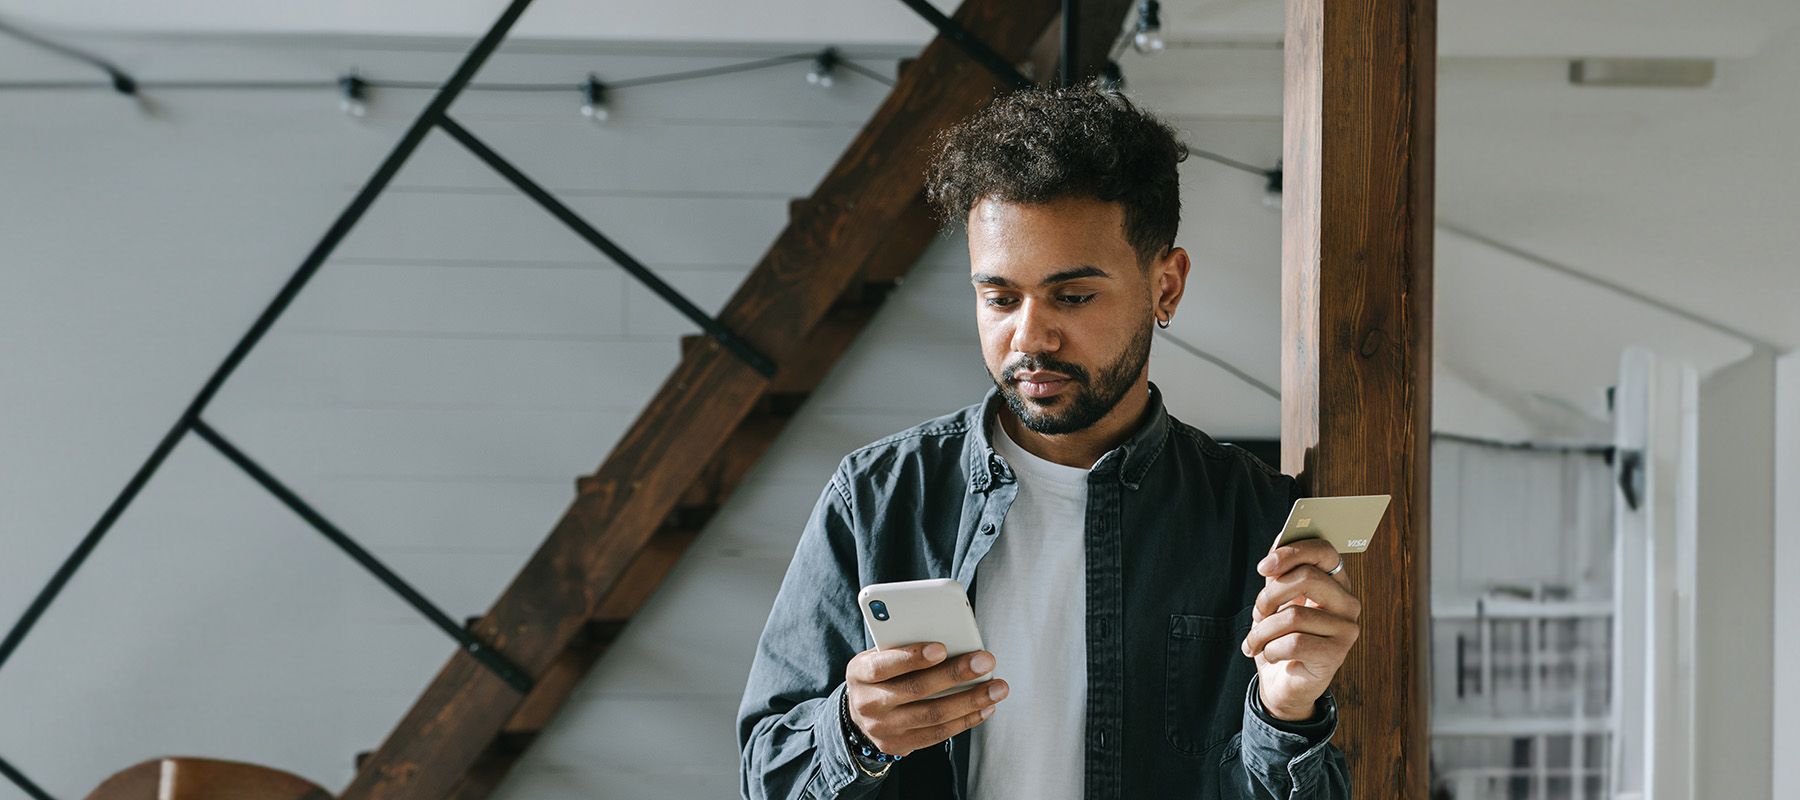 man leaning against post in loft style apartment staring at his cell phone and holding an MBNA credit card in his other hand